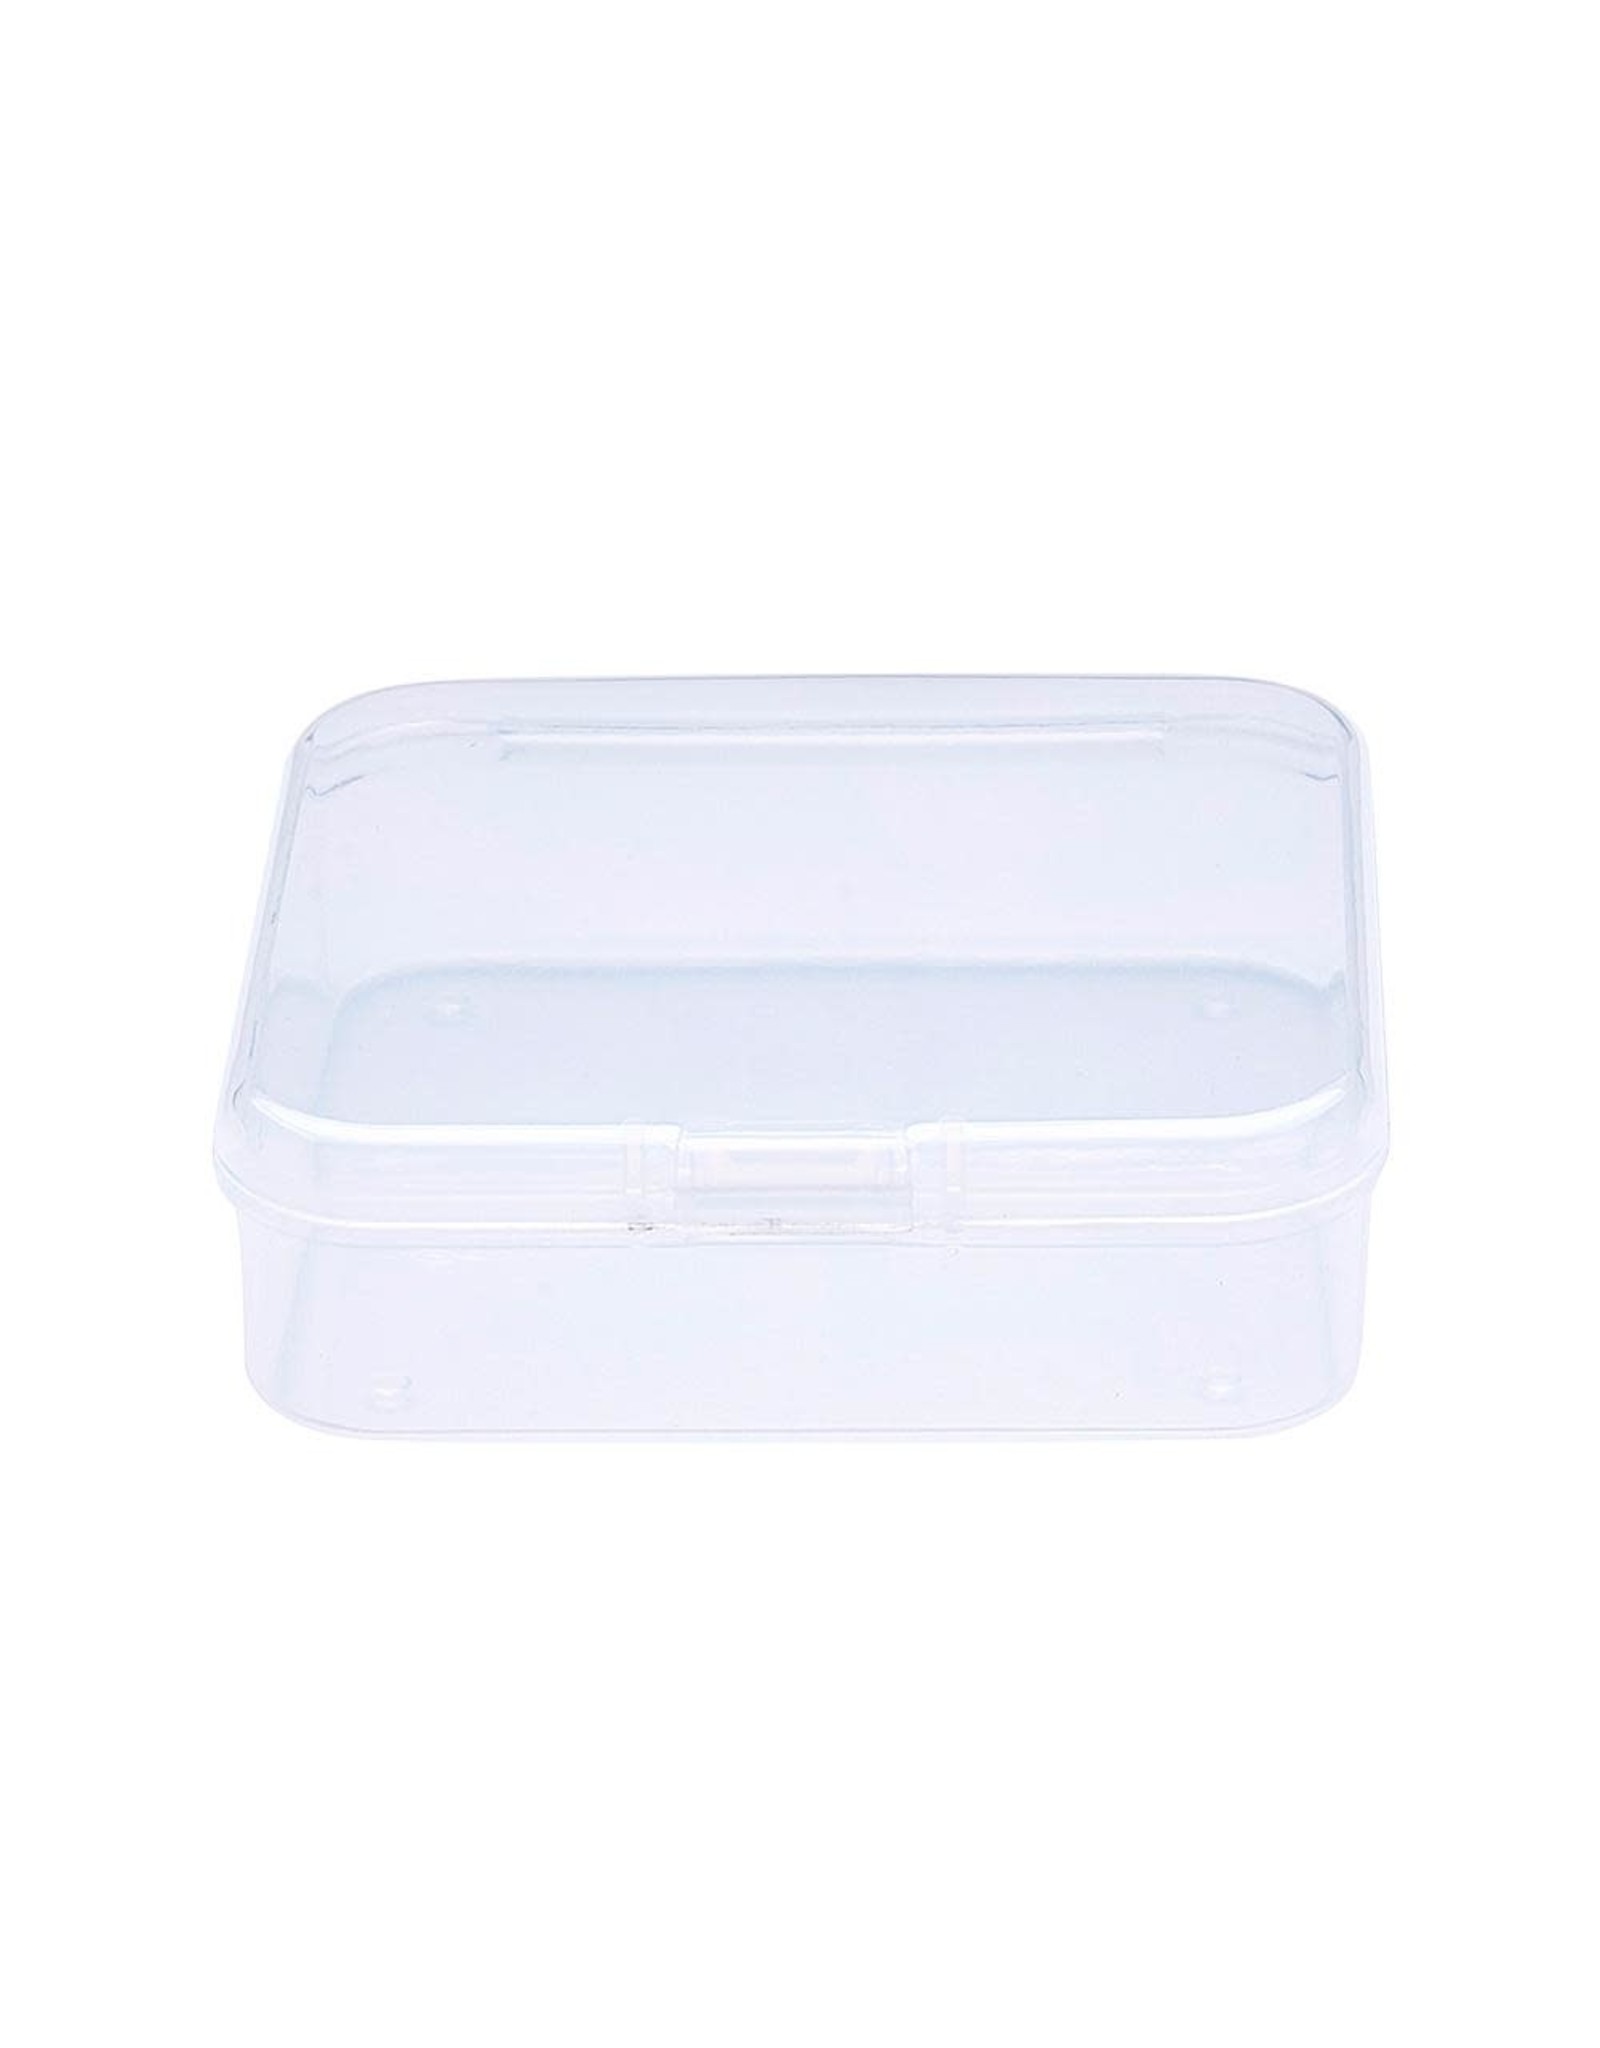 Bead Container Square Clear  6.4x6.4x2cm